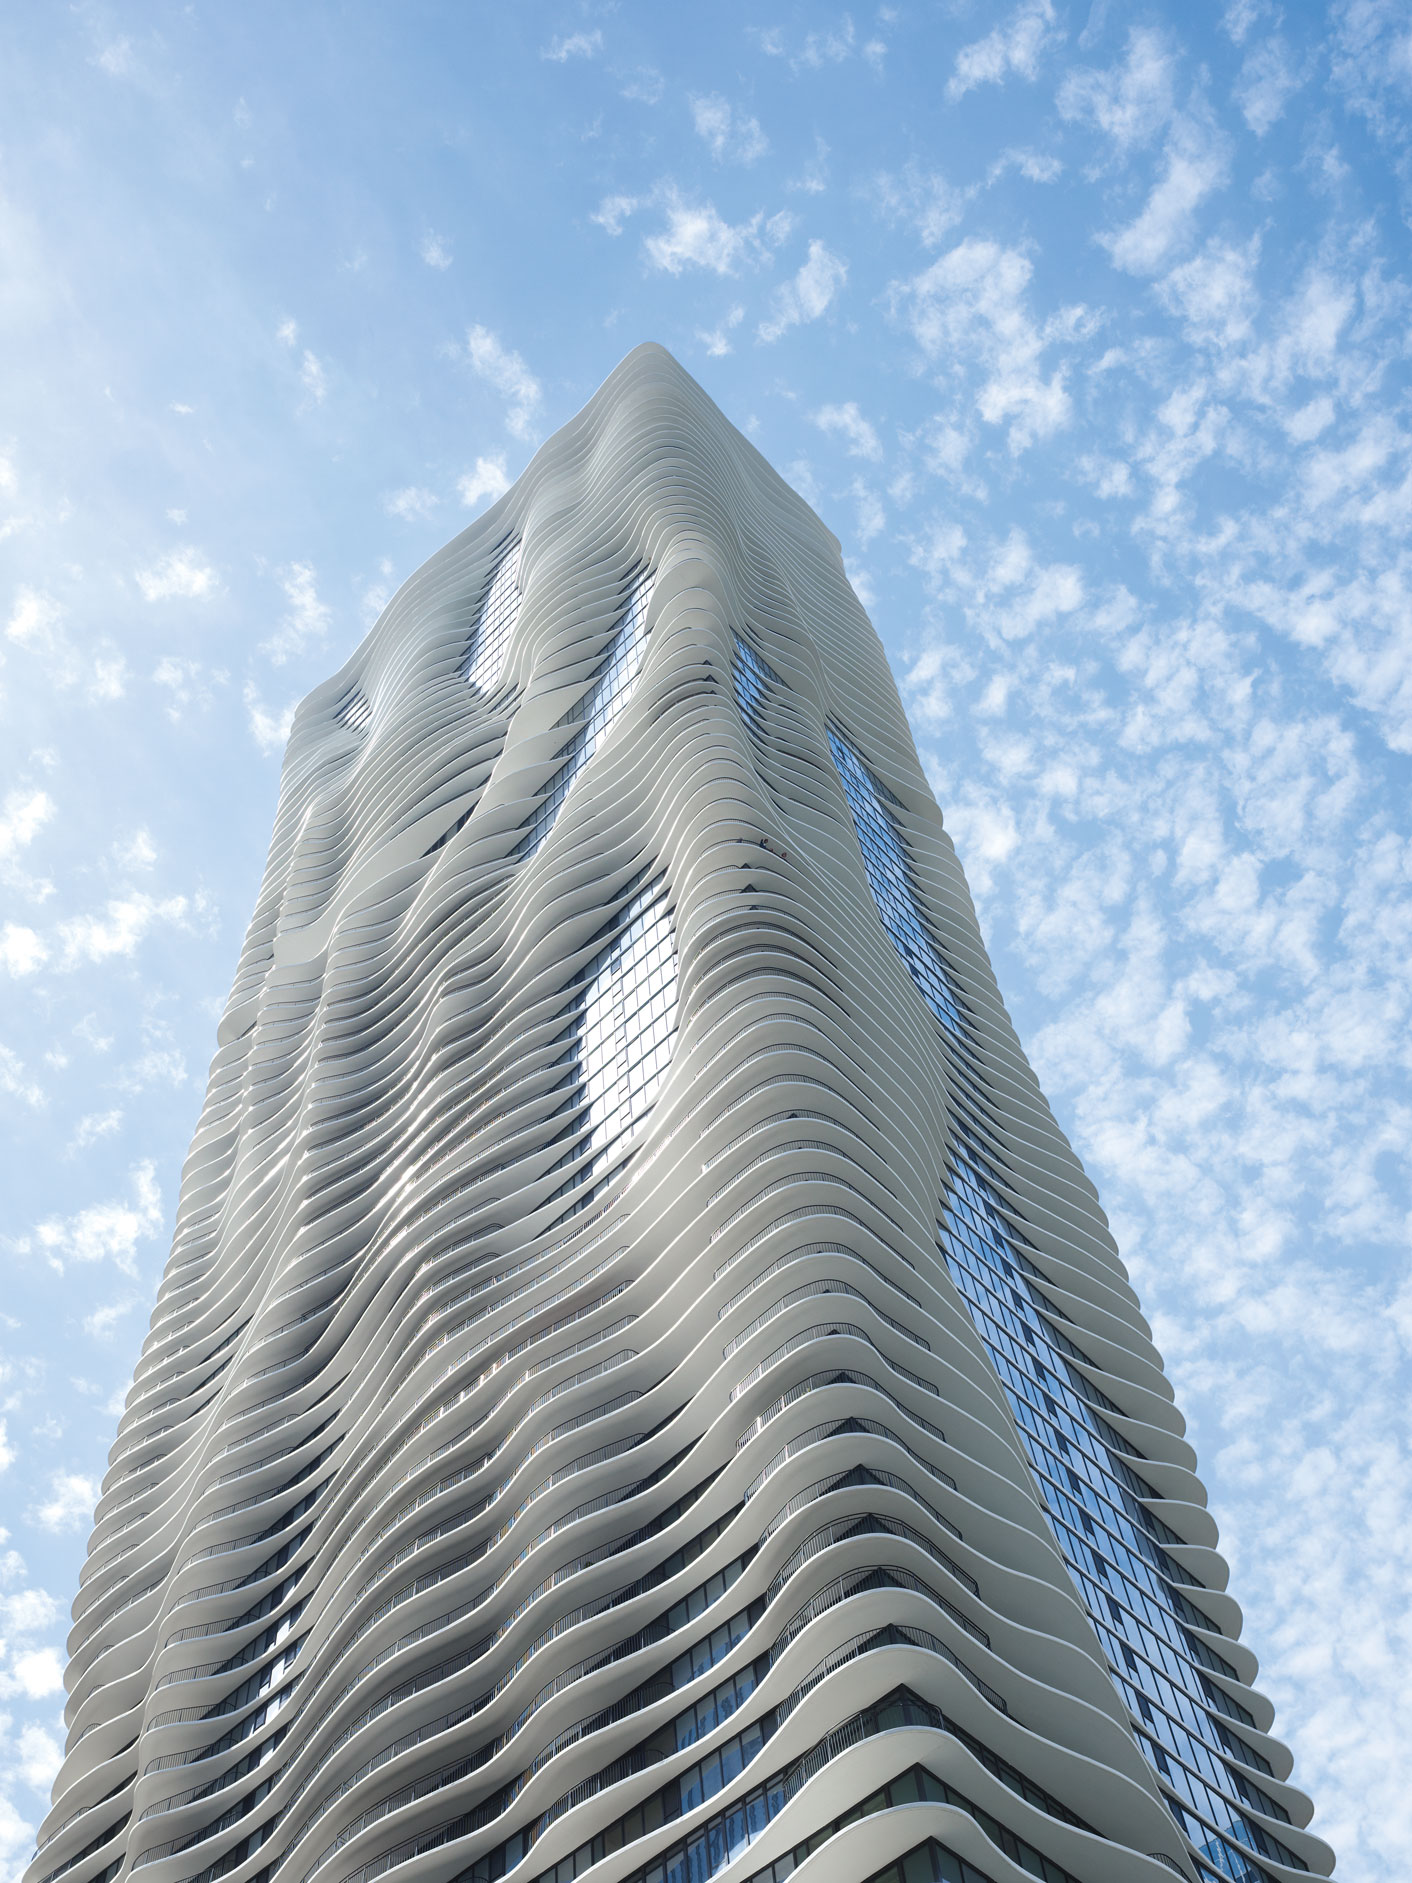 Studio Gang, Aqua Tower, Chicago, Illinois, USA, 2010. 
The Aqua Tower’s floor plates were shaped to give residents sight lines to specific Chicago landmarks as well as to provide solar shading and help break up the wind. The cantilevered, curvilinear slabs produce an elevation with variegated light and shadow as well as the appearance of undulating movement when seen from below. Steve Hall © Hall + Merrick